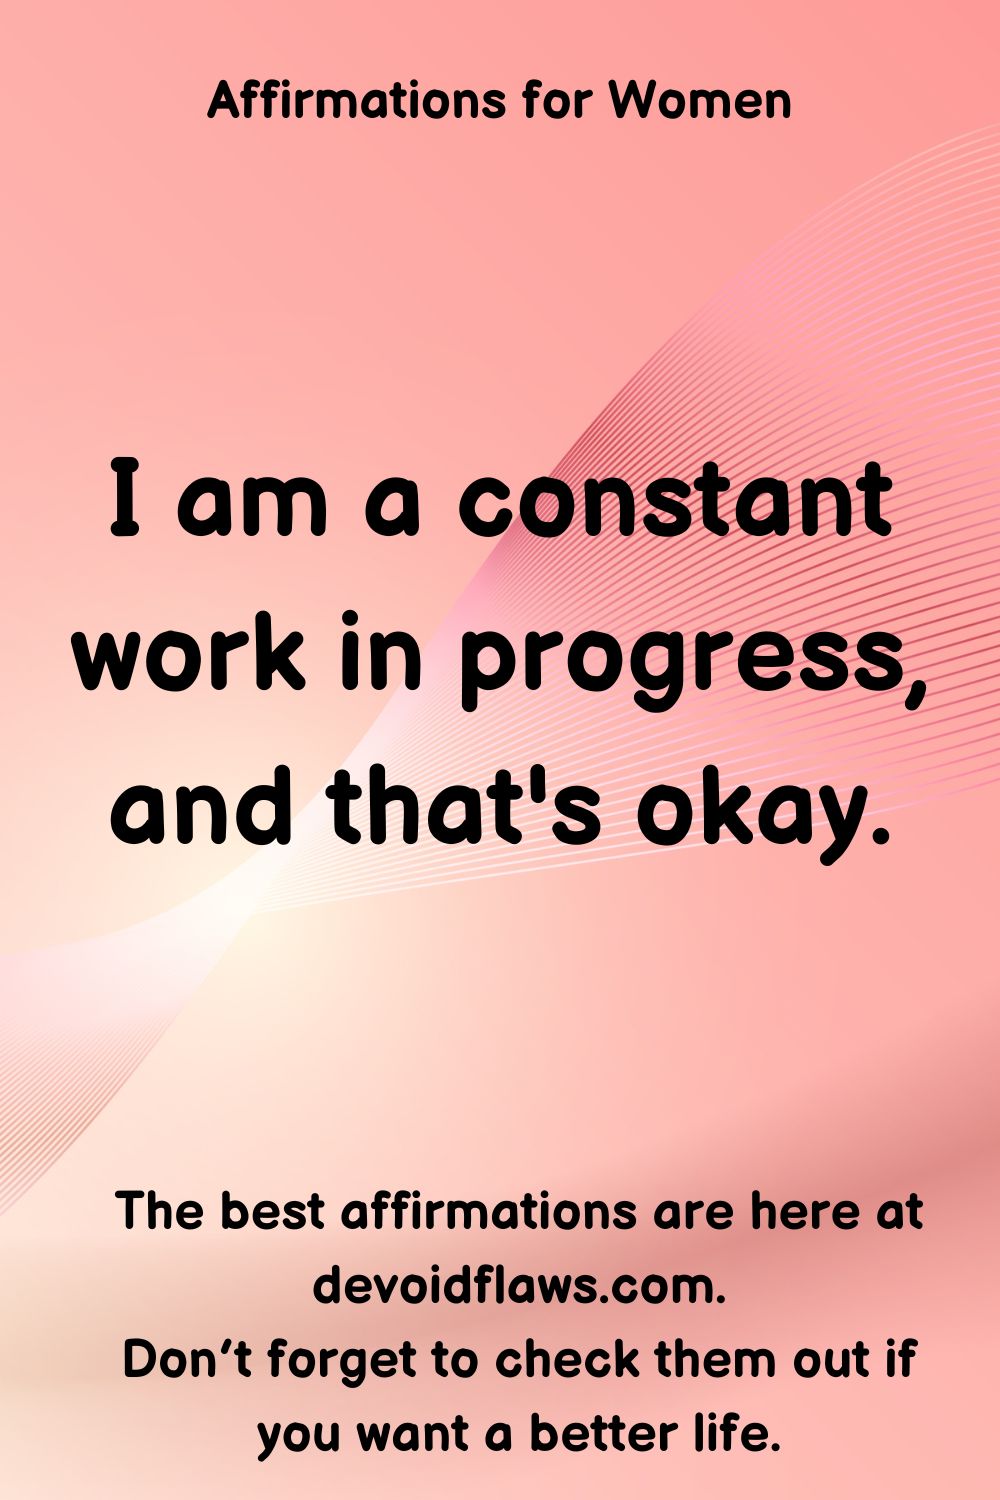 100 Affirmations for Women to Use Daily